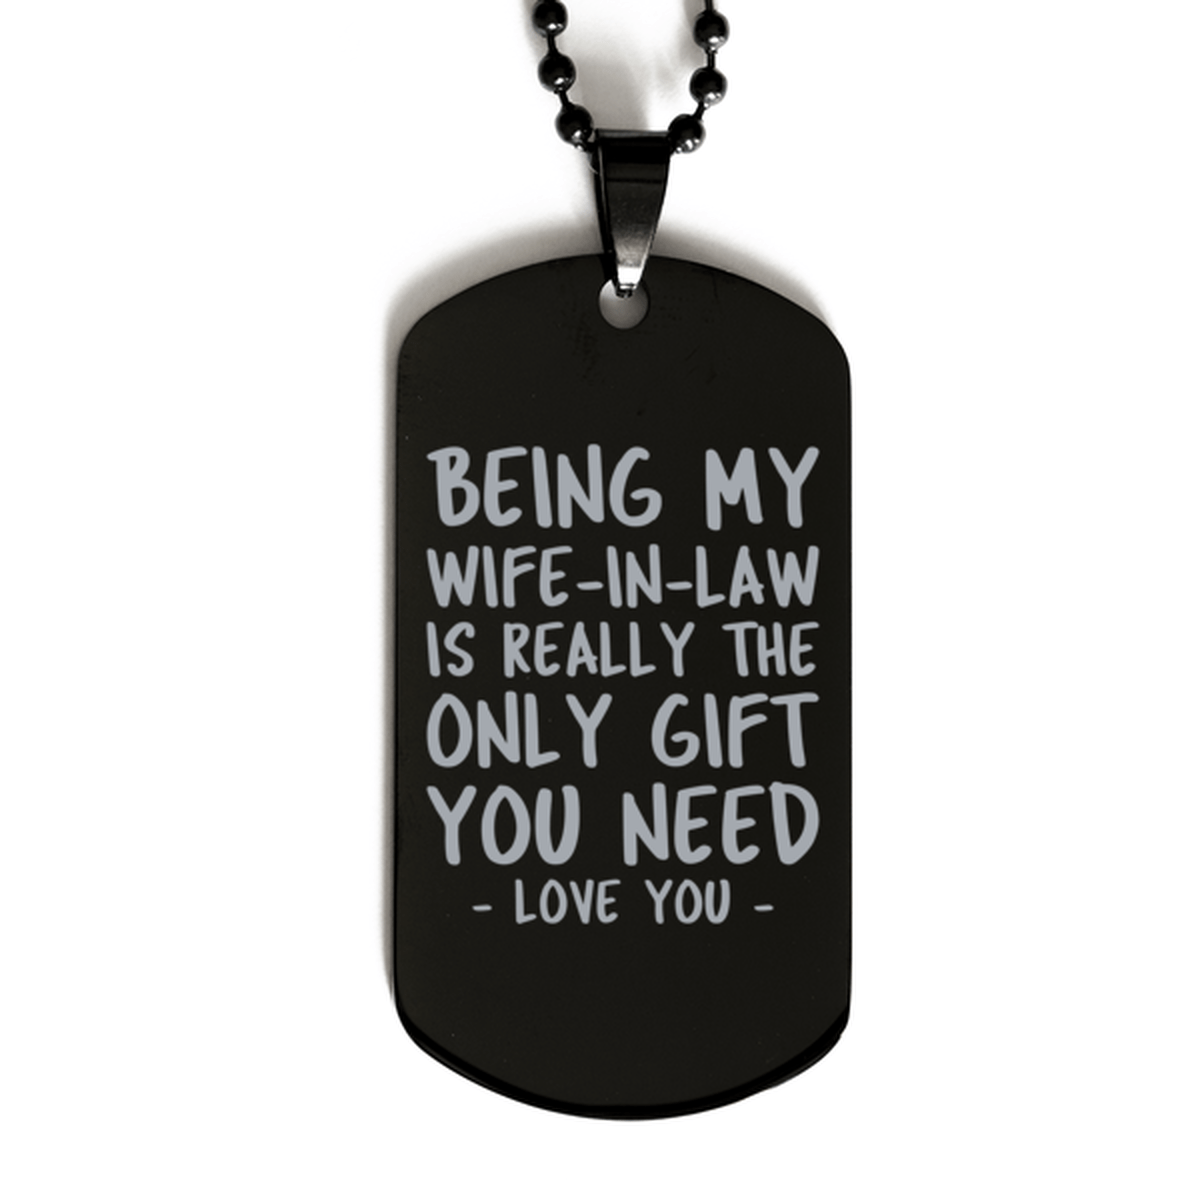 Funny Wife-in-law Black Dog Tag Necklace, Being My Wife-in-law Is Really the Only Gift You Need, Best Birthday Gifts for Wife-in-law